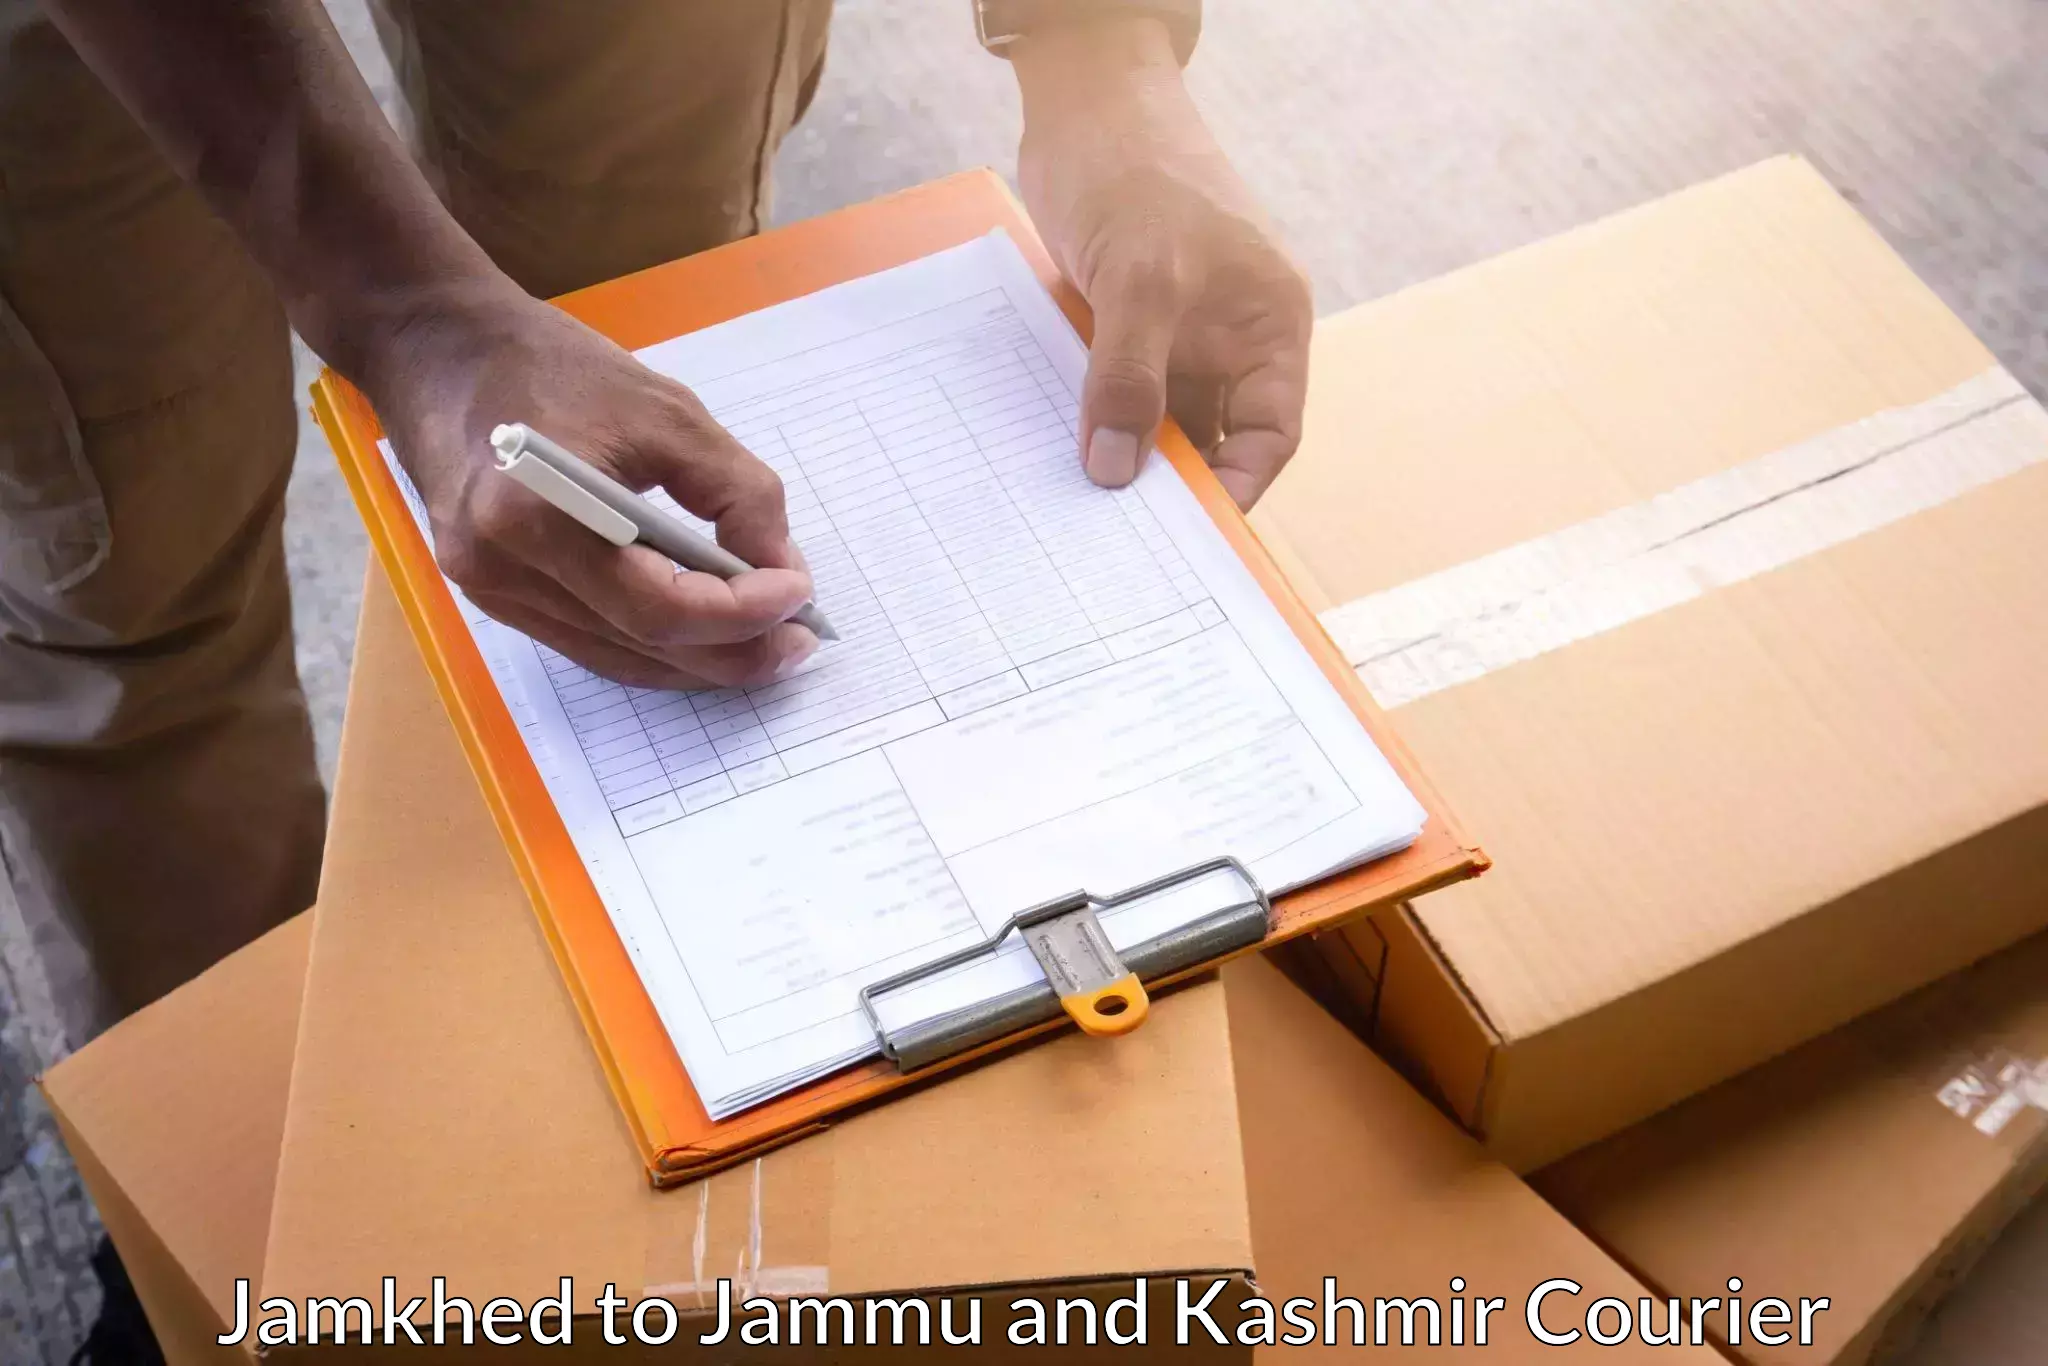 24/7 courier service Jamkhed to Jammu and Kashmir